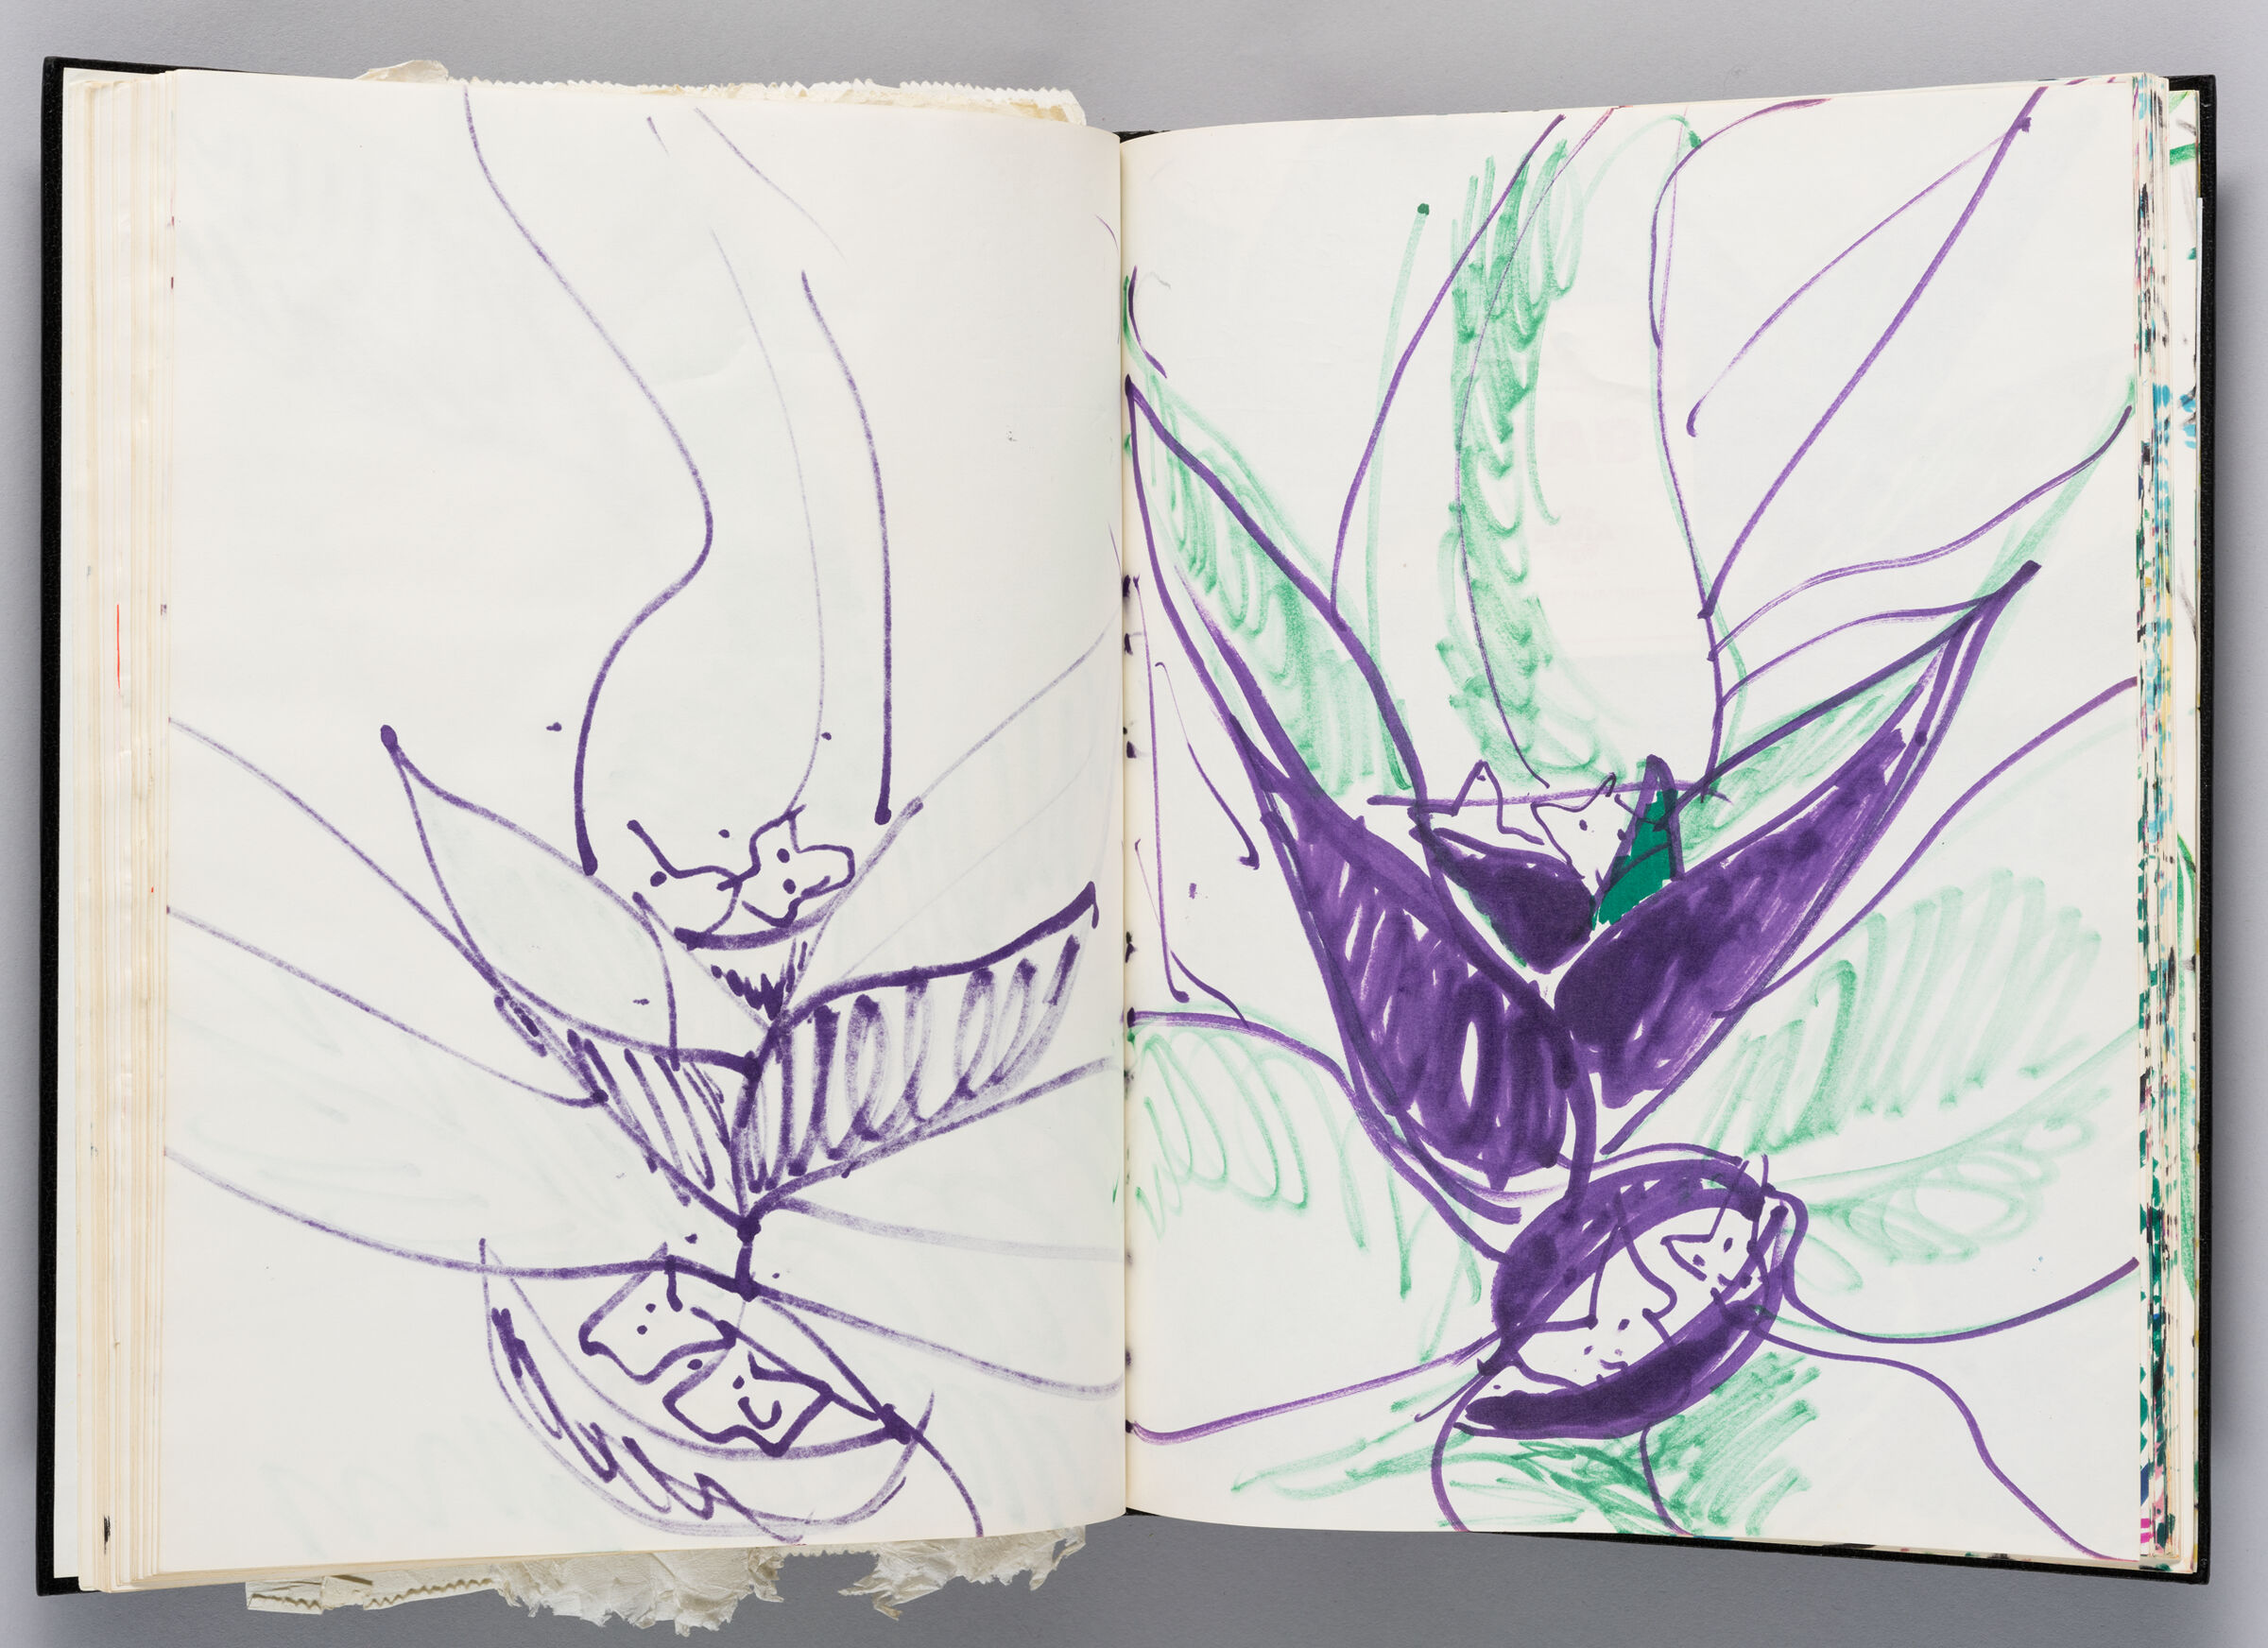 Untitled (Bleed-Through Of Previous Page, Left Page); Untitled (Plant, Right Page)